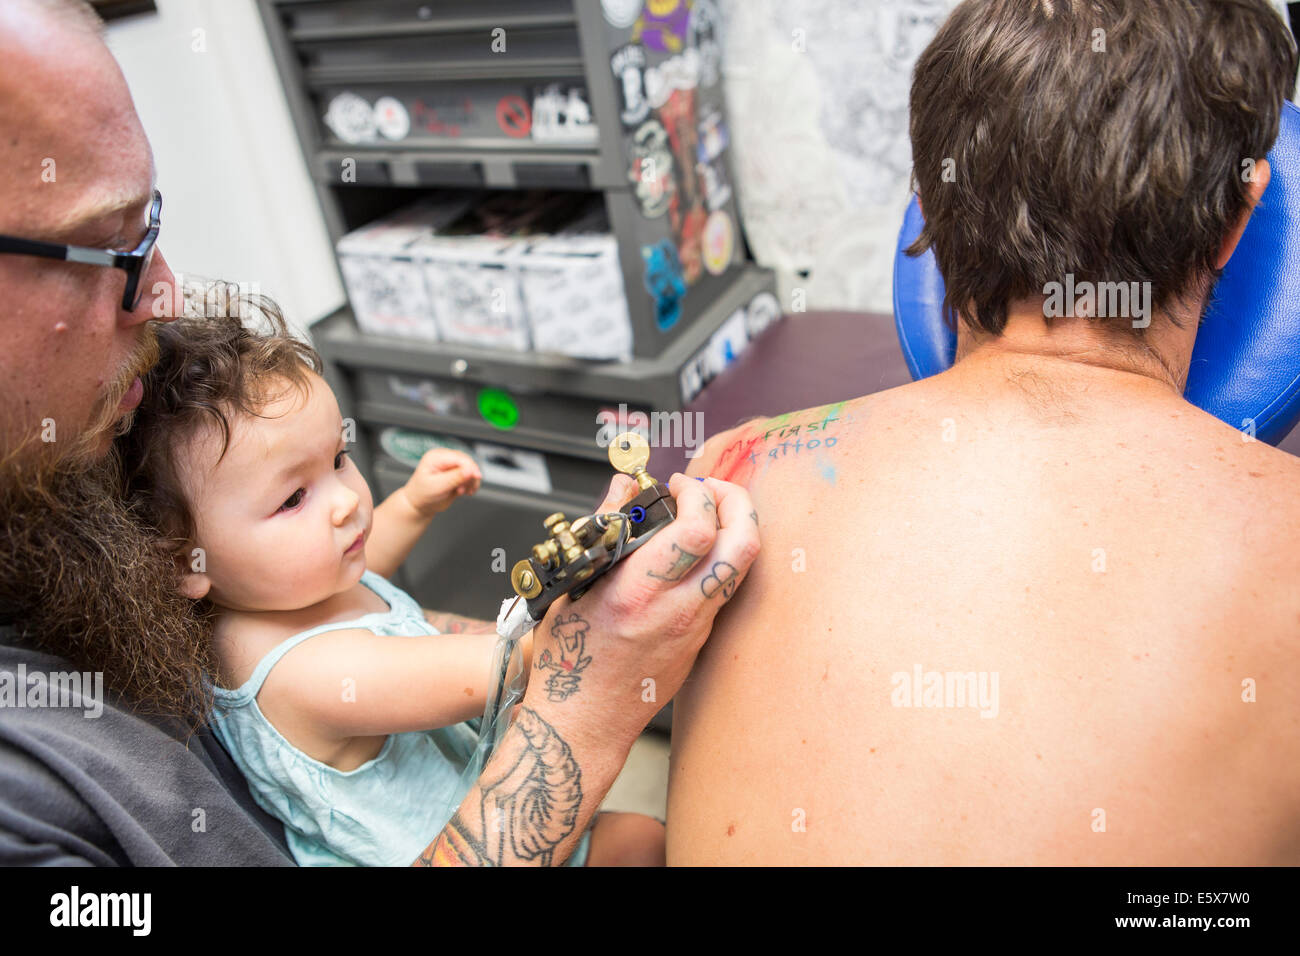 Tattoo artist showing toddler how to give a tattoo Stock Photo